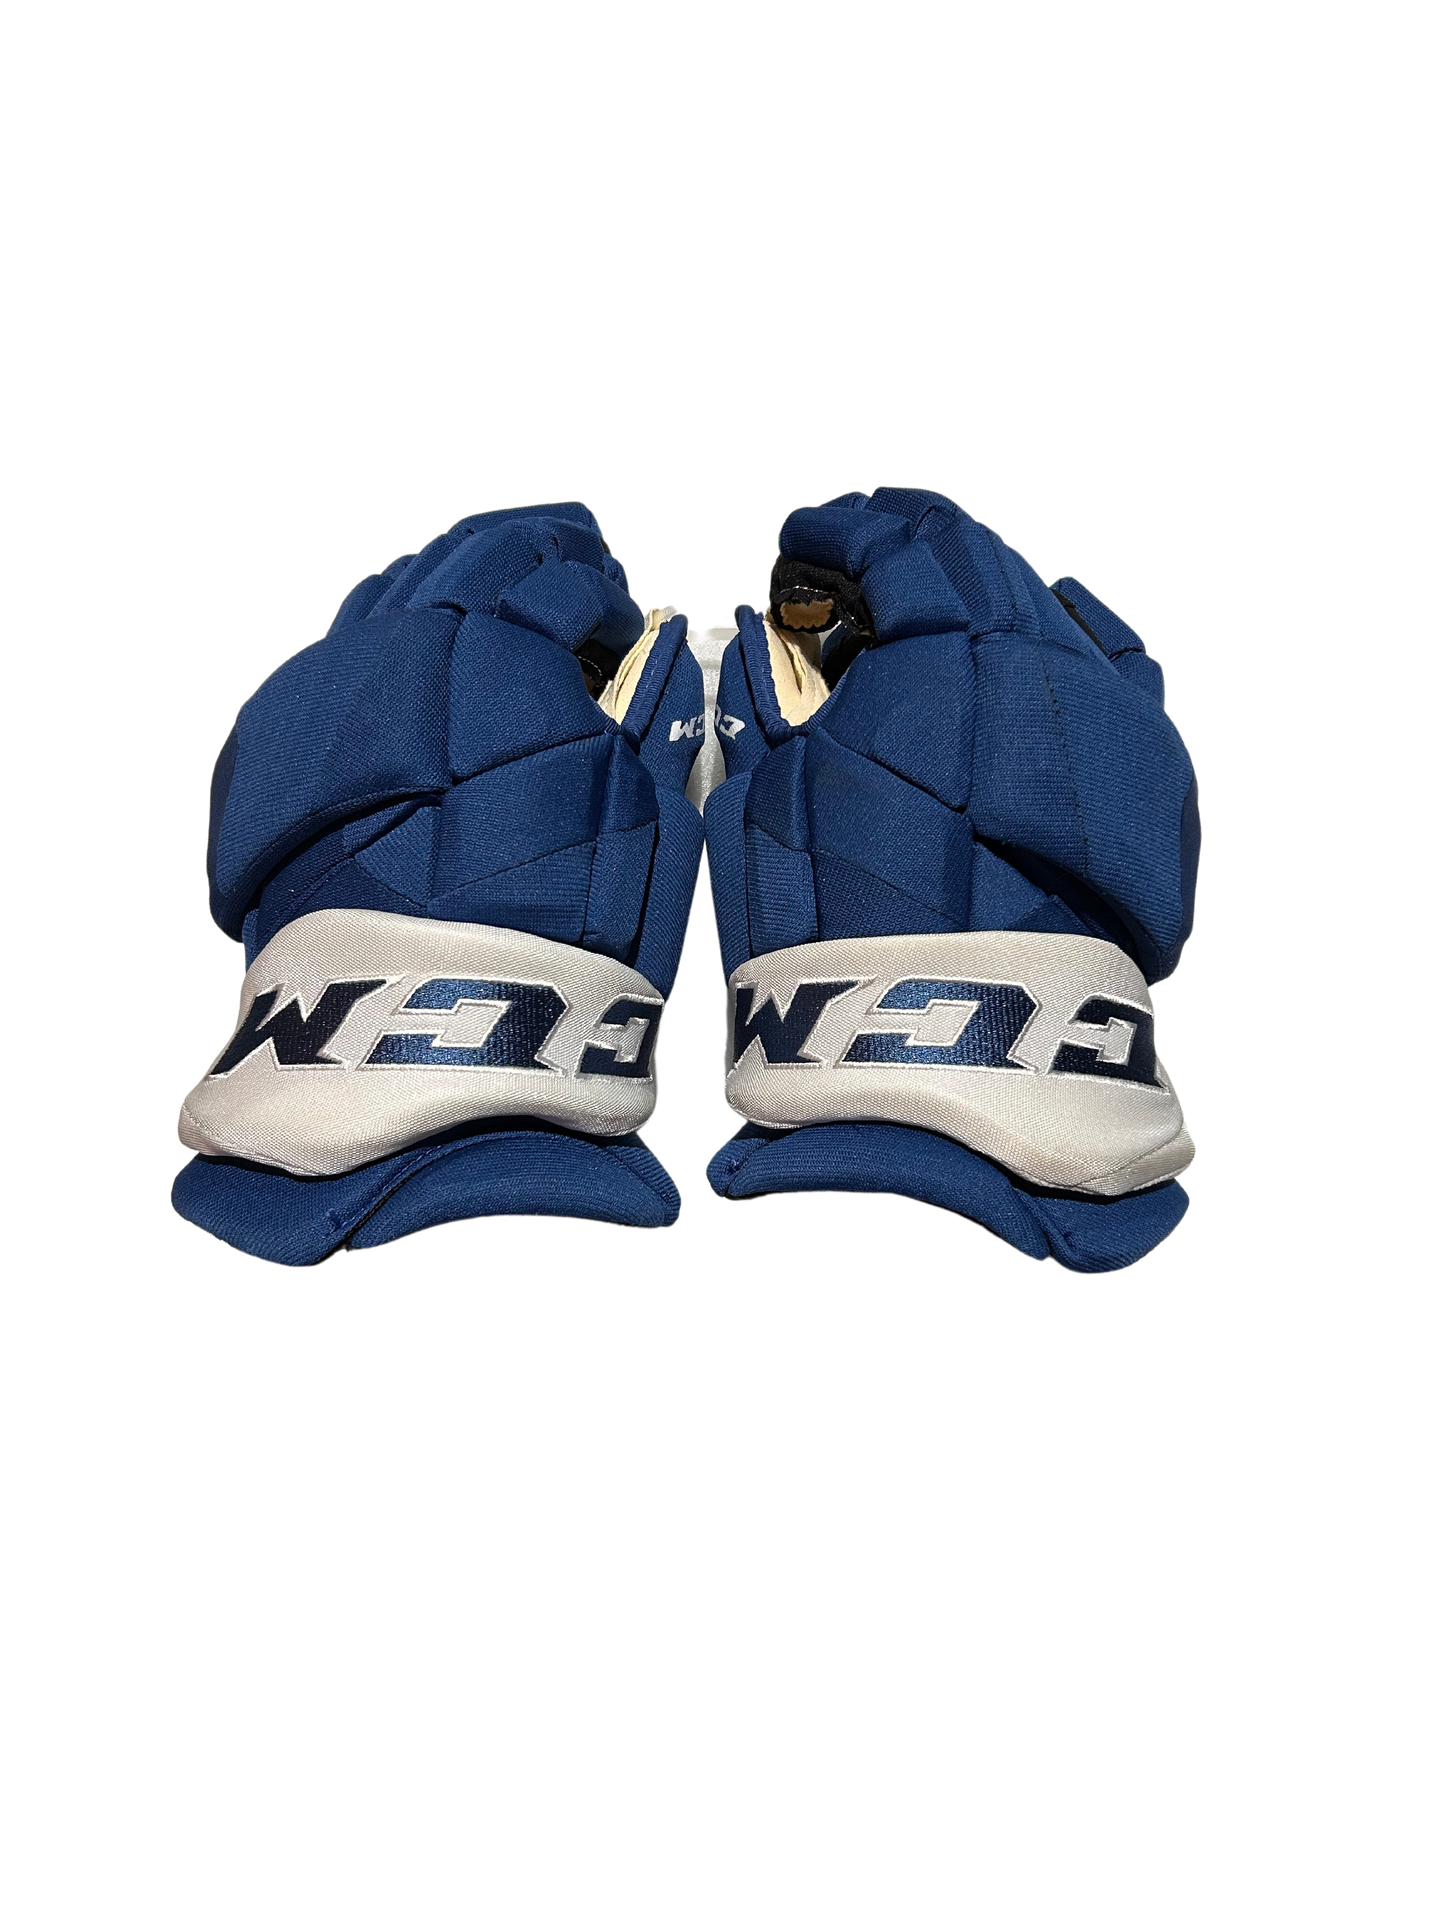 New Blue Team Issued Colorado Avalanche CCM Jetspeed Gloves (Multiple Sizes)